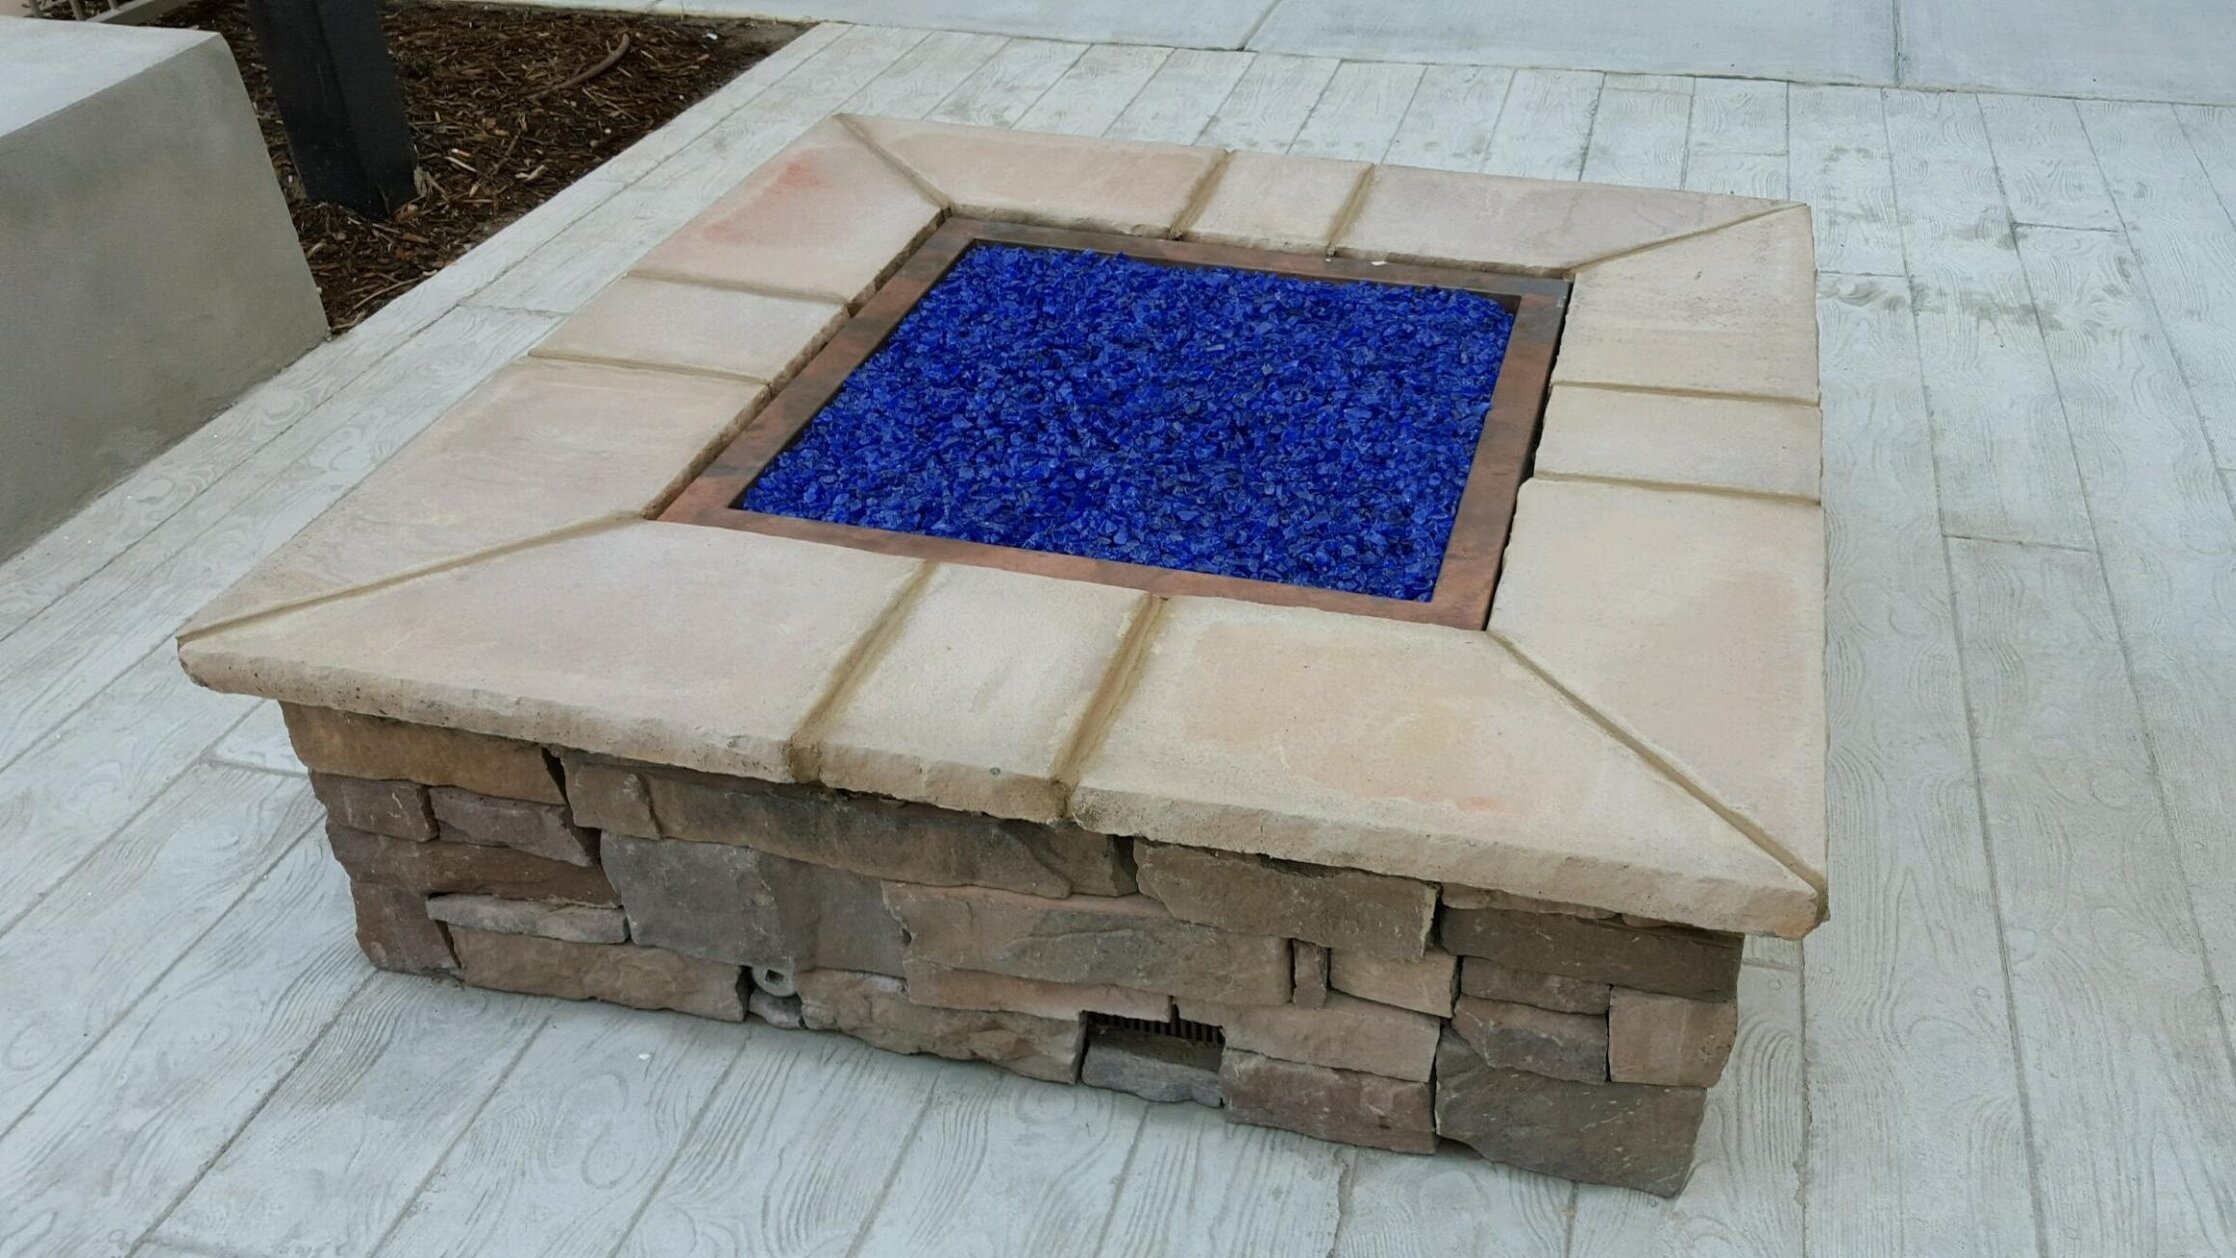 Fire Features Bobe Water, Prefabricated Fire Pits